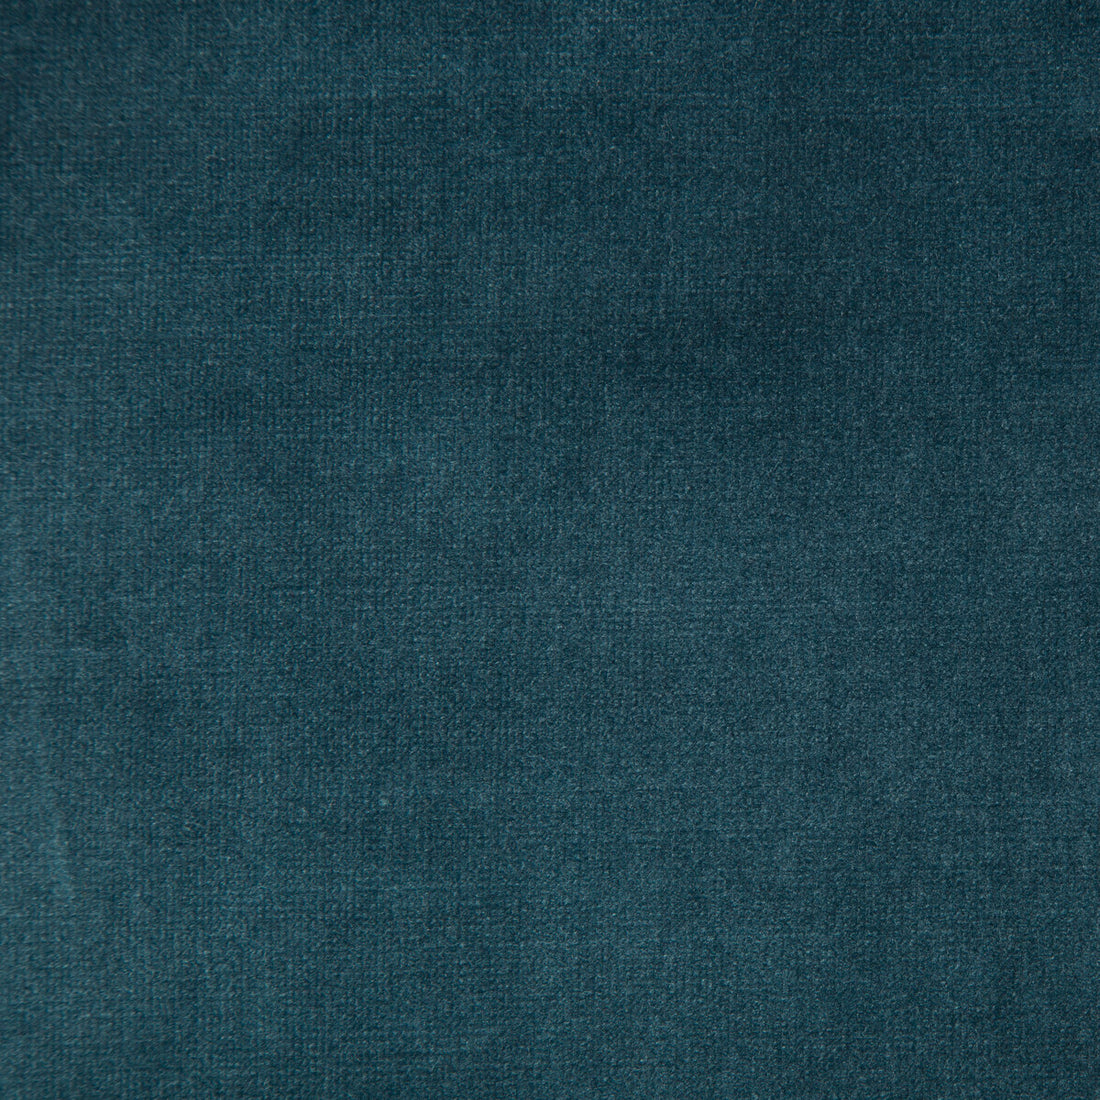 Chessford fabric in lagoon color - pattern 35360.535.0 - by Kravet Smart in the Performance collection